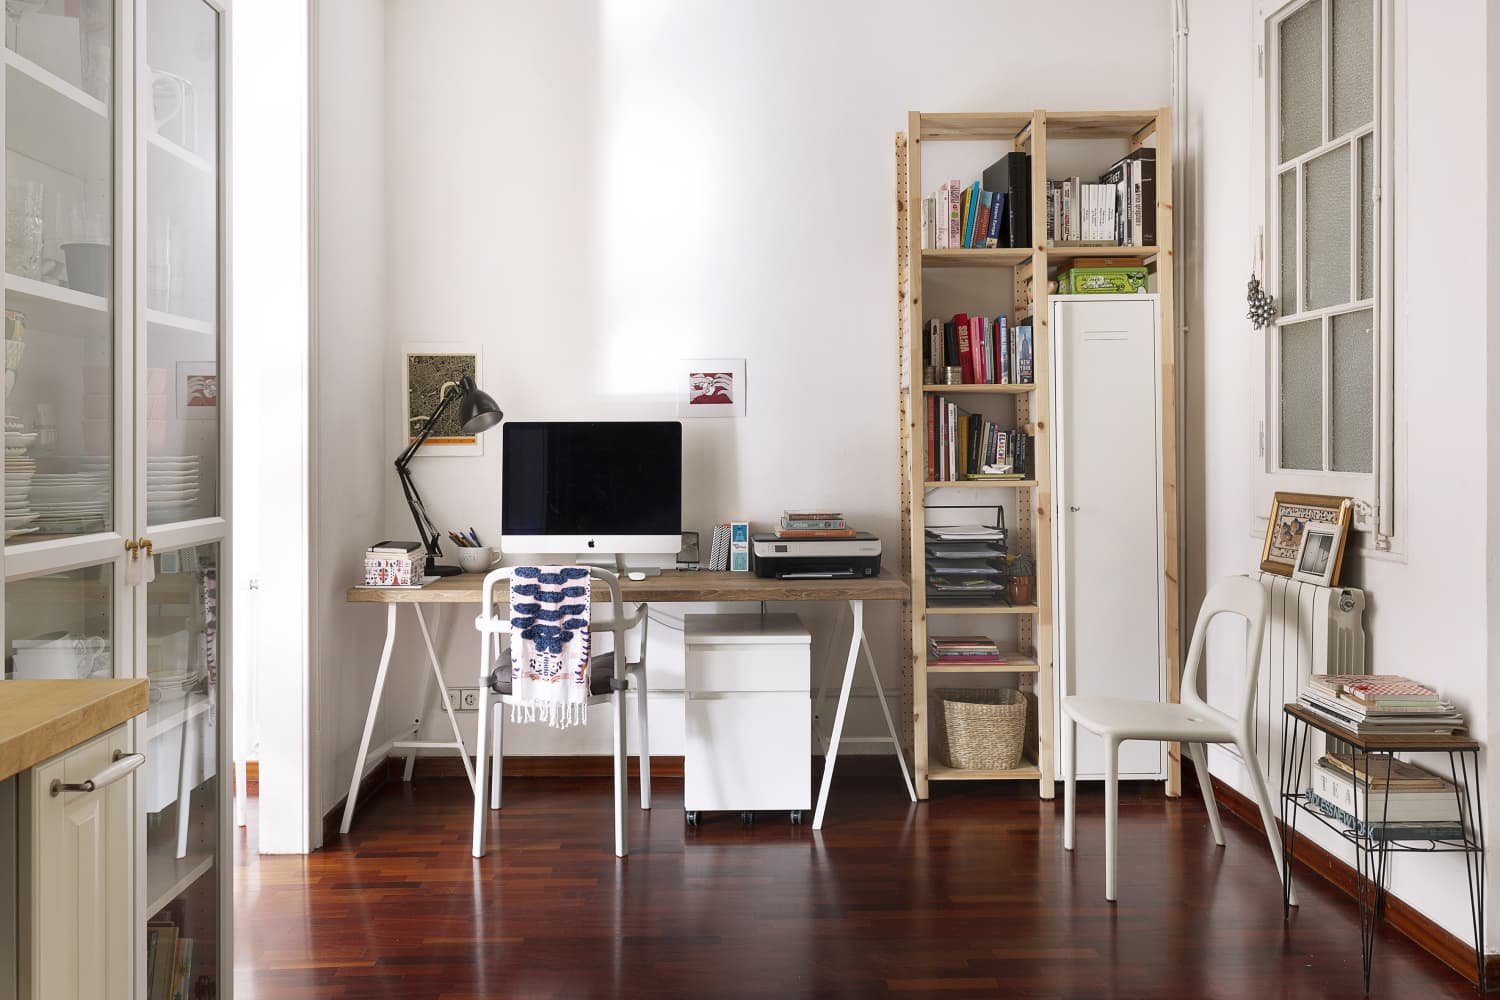 You Can Shrink All Your Paper Clutter Piles With 3 Easy Steps